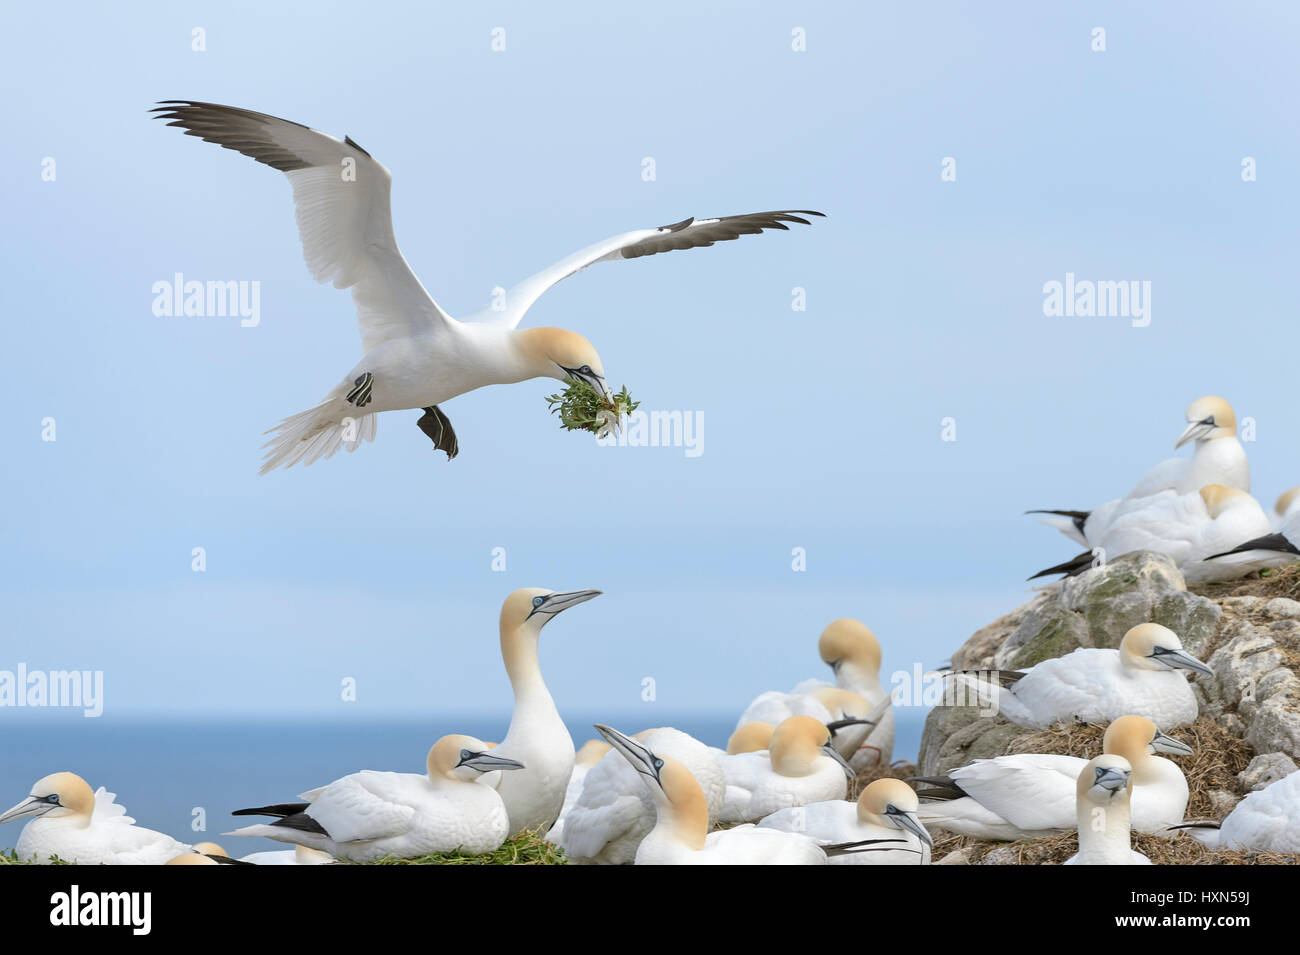 Northern gannet (Morus bassanus) adult in flight with nest material at breeding colony. Great Saltee island, co Wexford, Ireland. April. Stock Photo